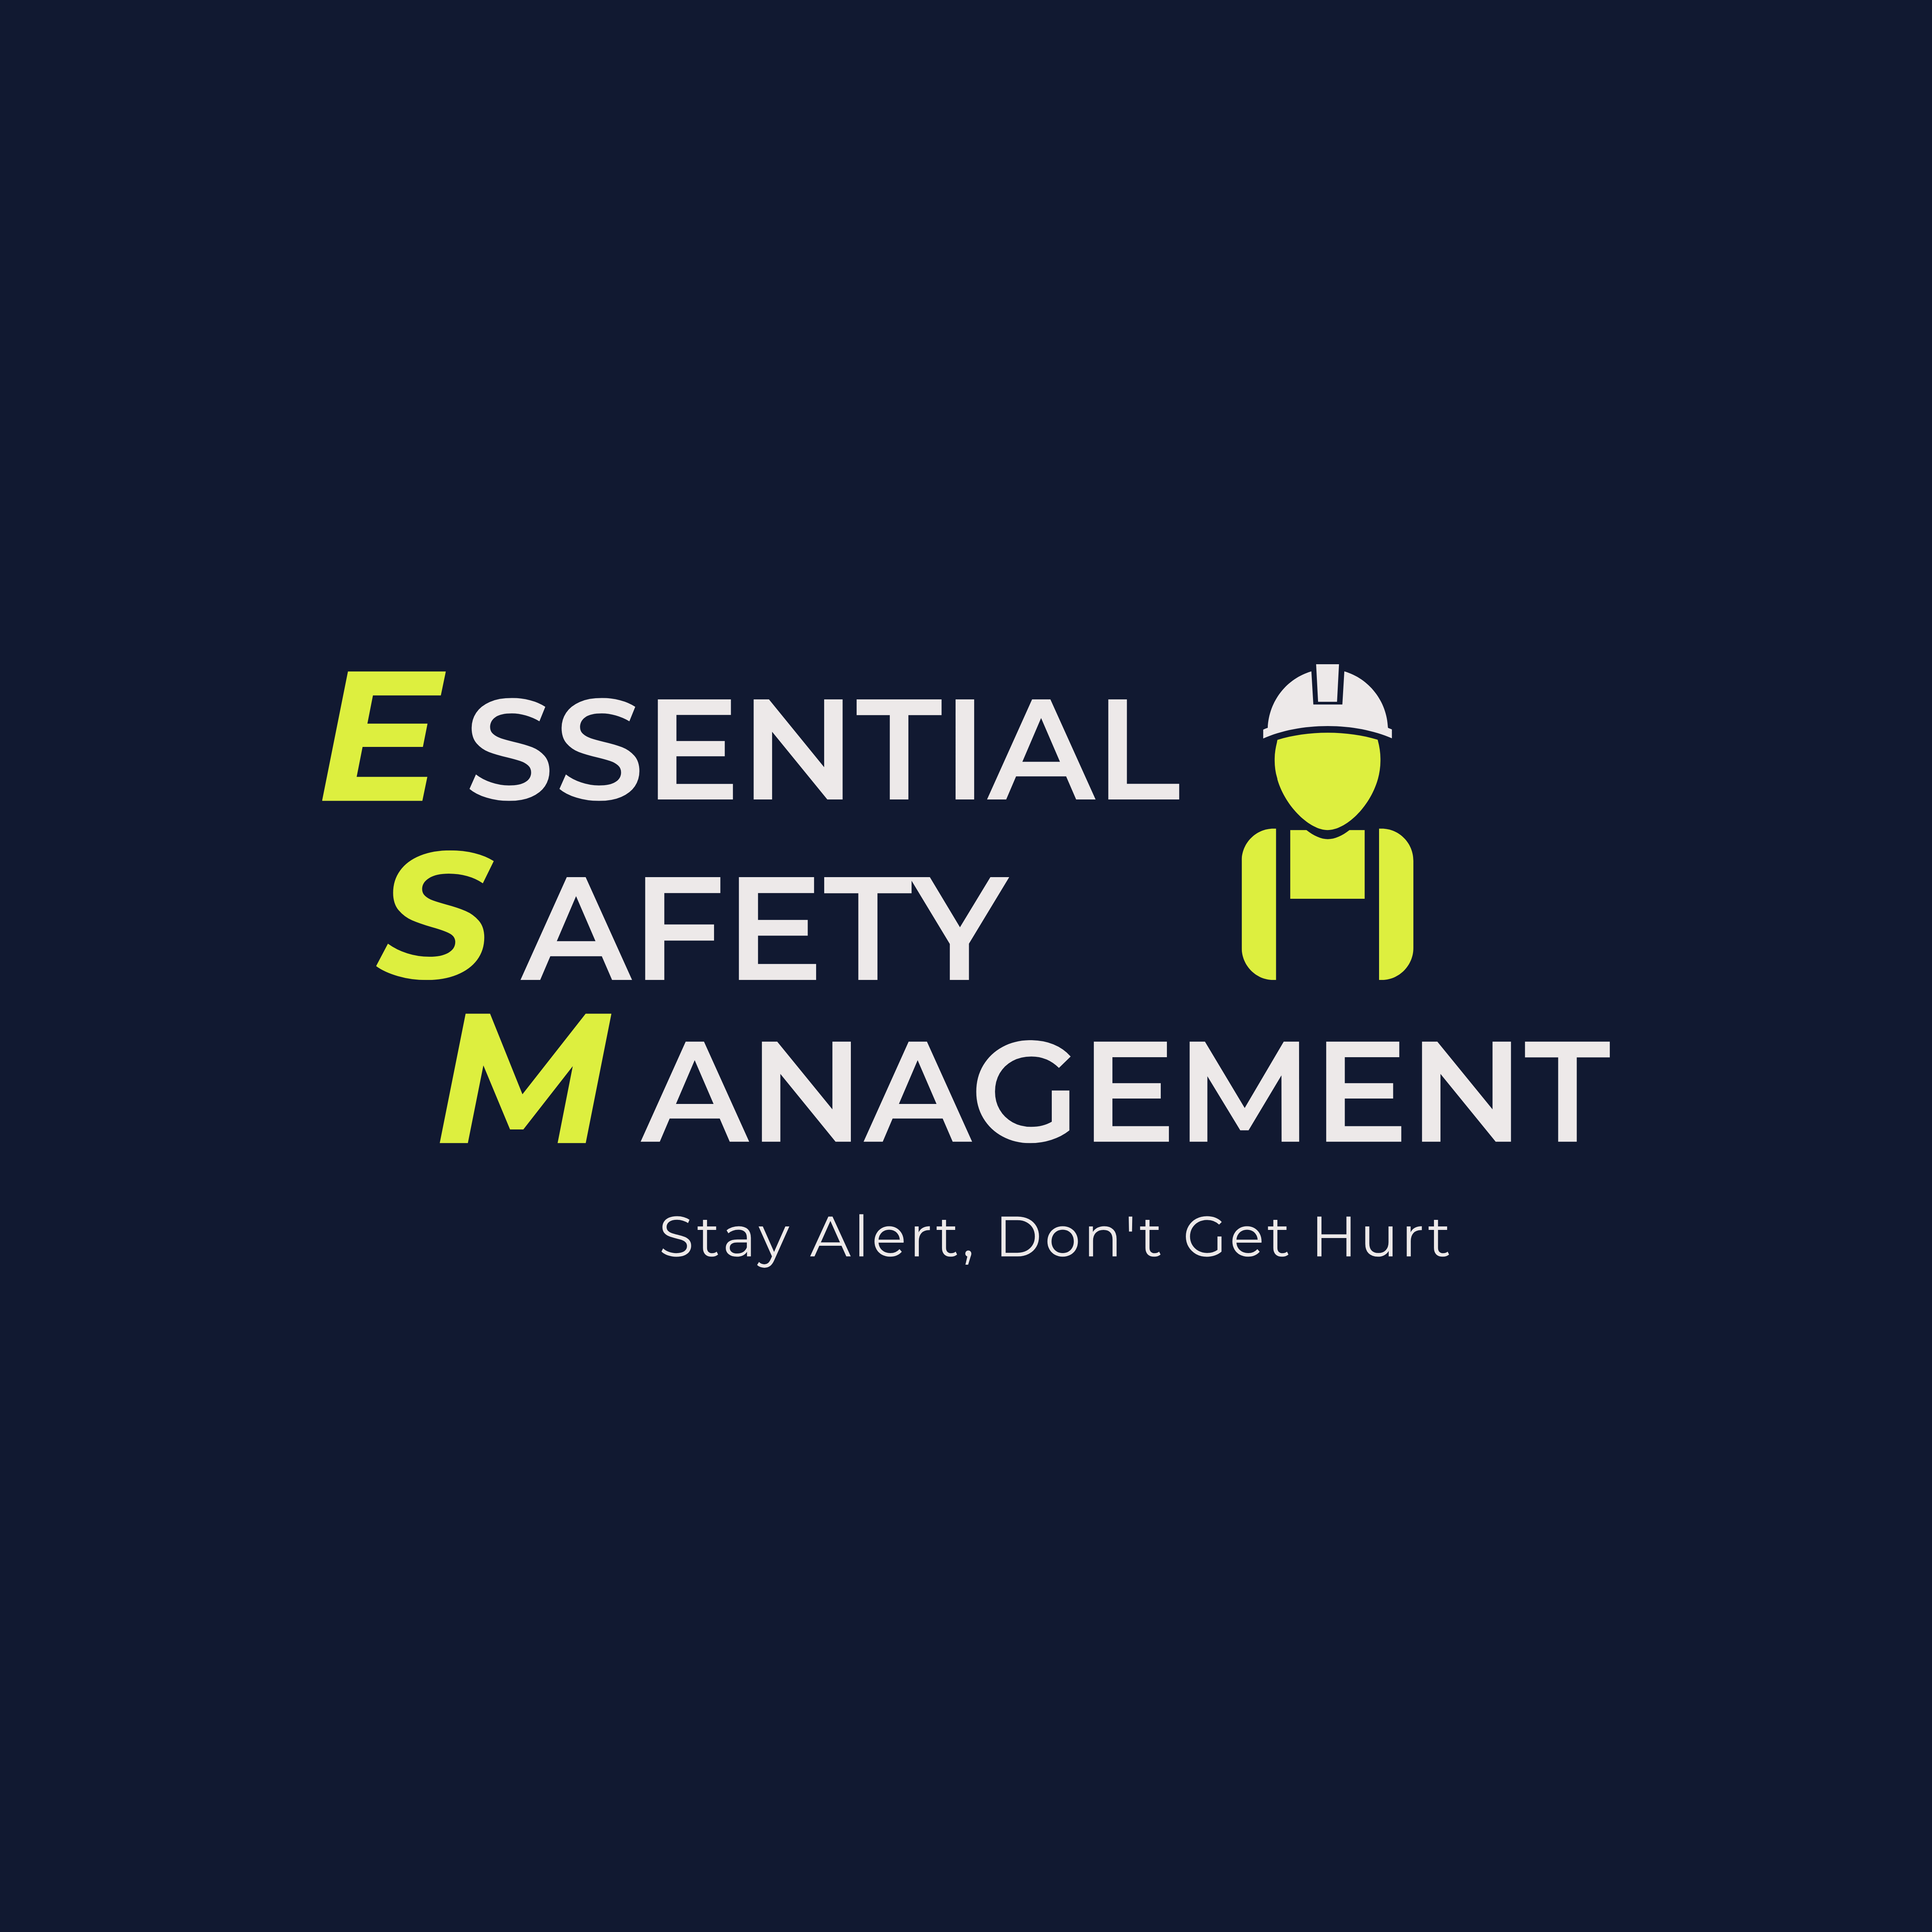 001 - Full Workplace Health and Safety Audit Checklist